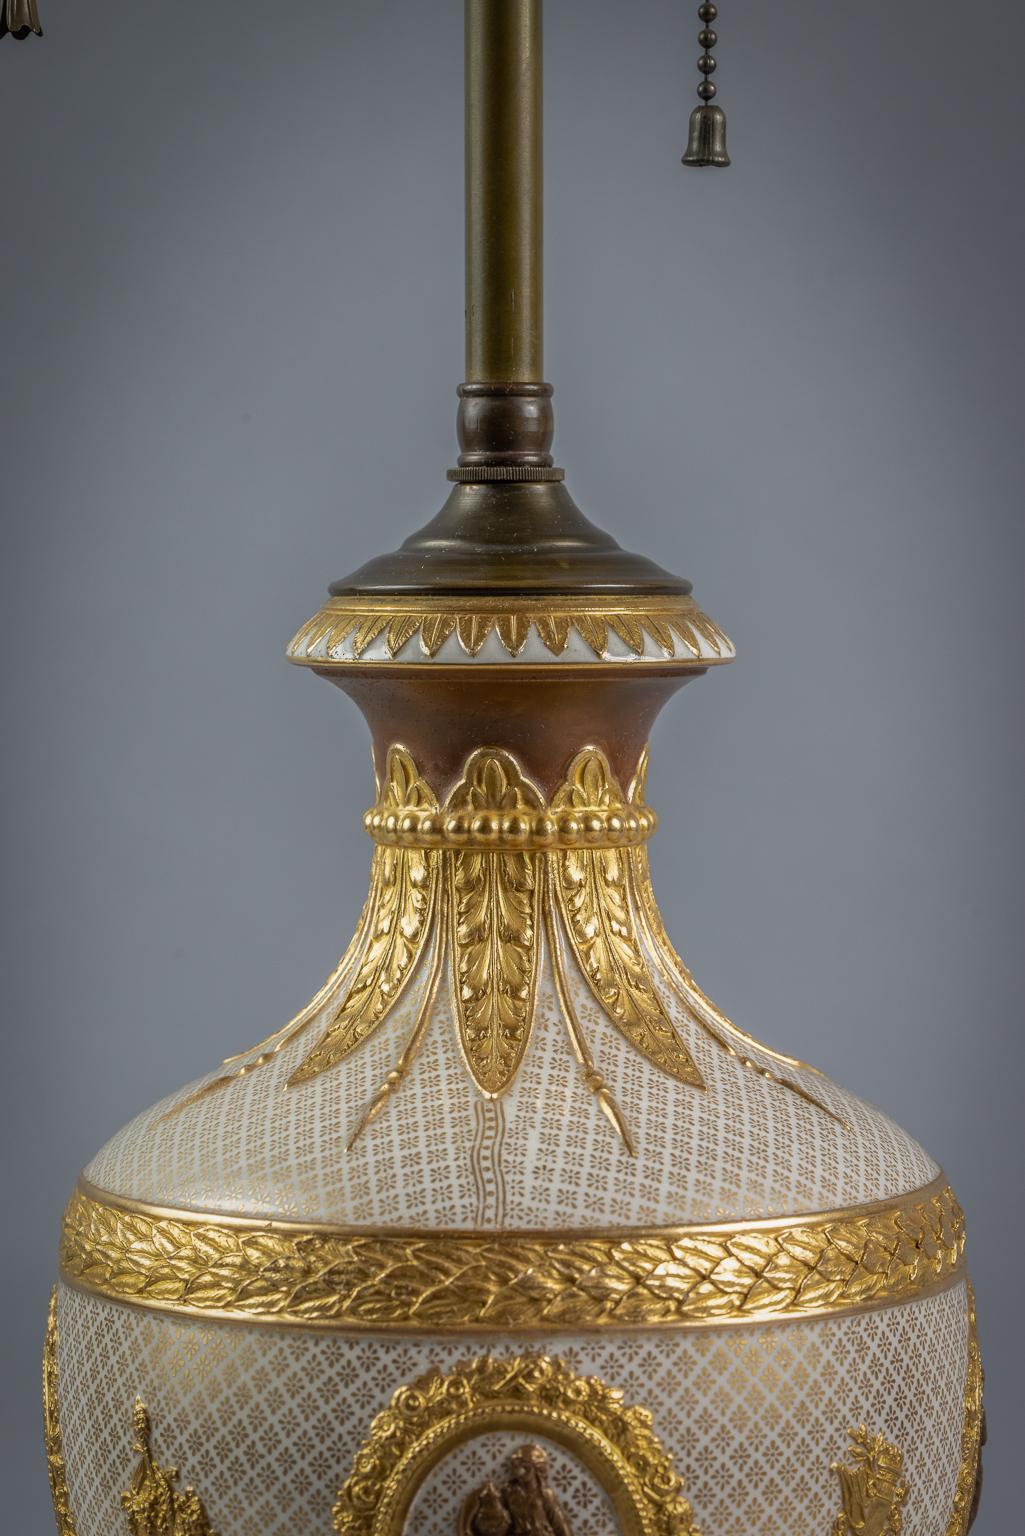 Wedgwood White Porcelain and Gilt Covered Urn Mounted as Lamp, 19th Century For Sale 1